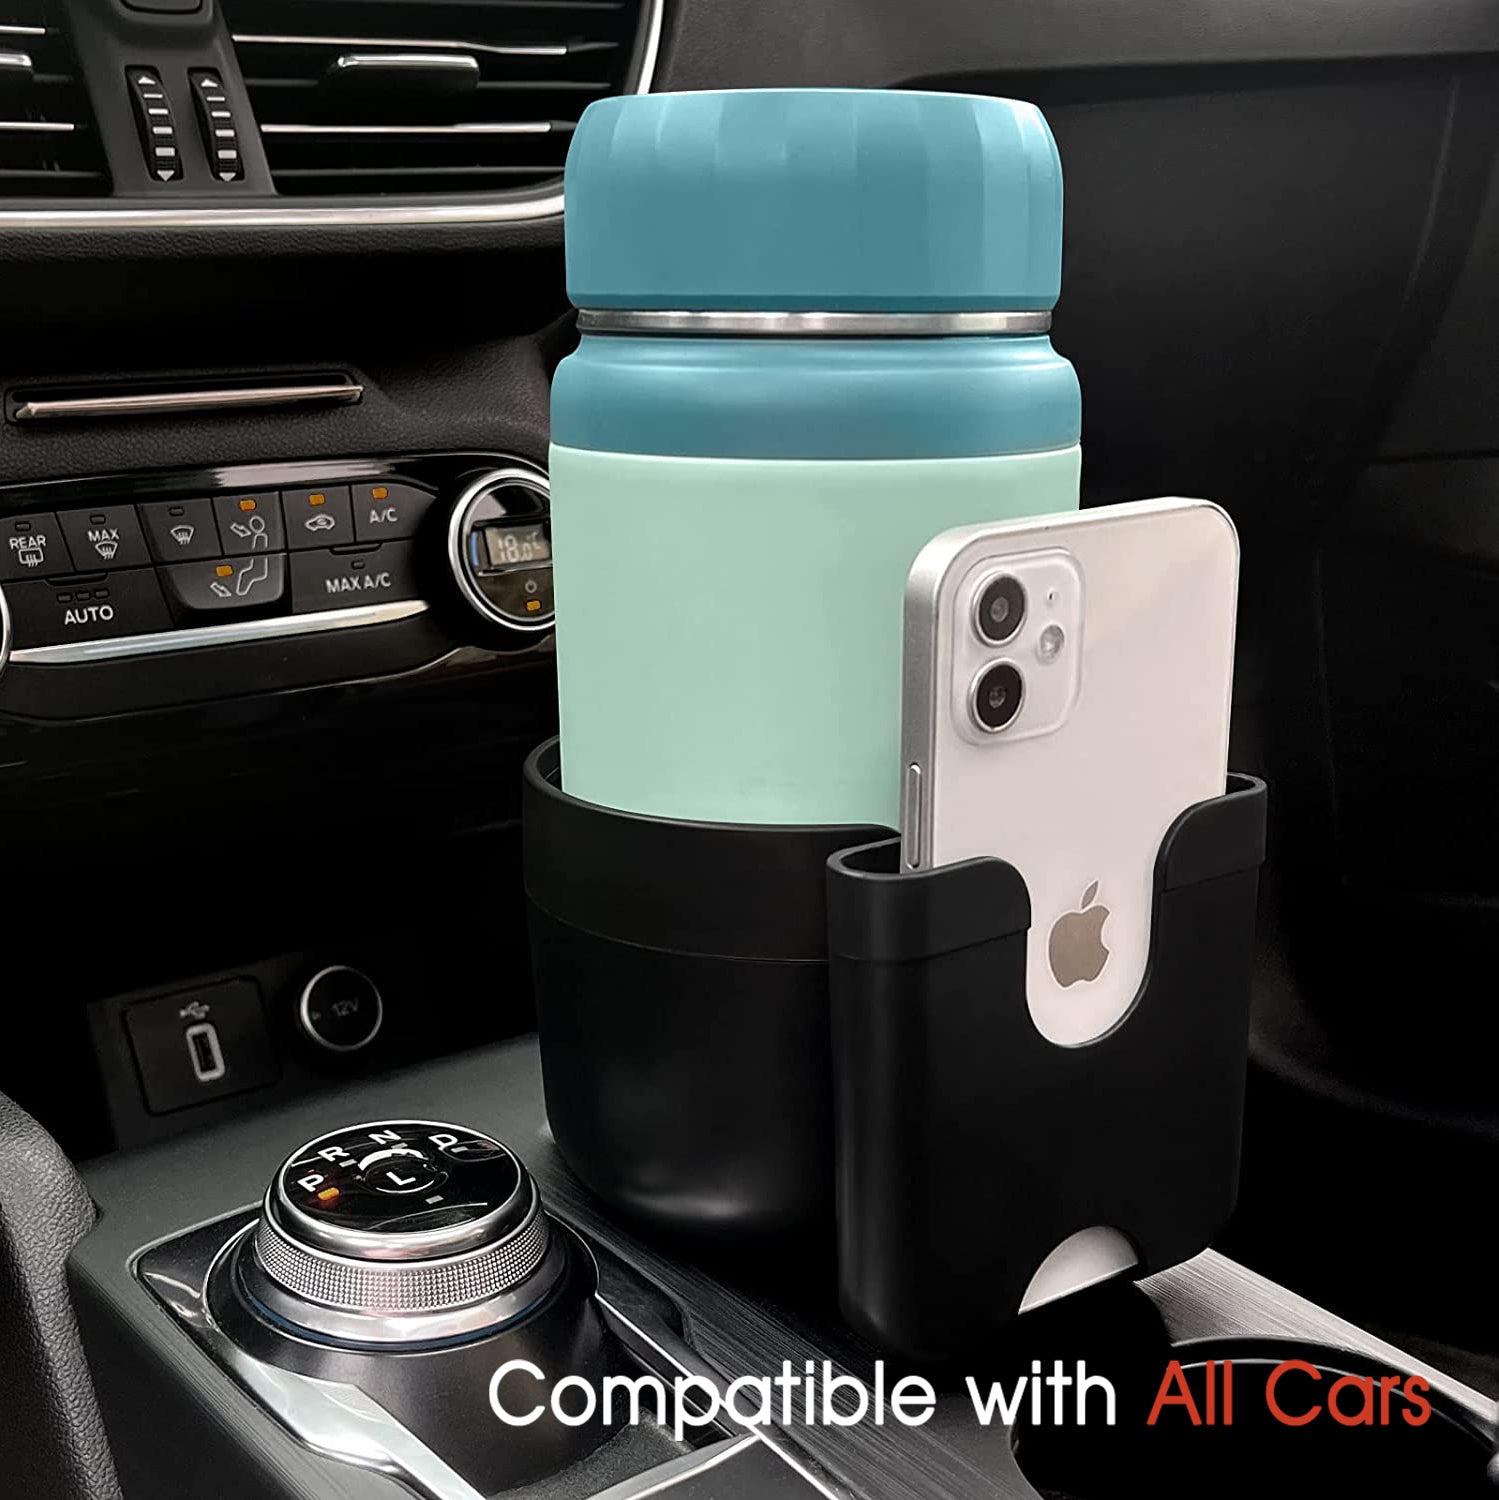 Custom Text For Car Cup Holder 2-in-1, Custom For Your Cars, Car Cup Holder Expander Adapter with Adjustable Base, Car Cup Holder Expander Organizer with Phone Holder RL15988